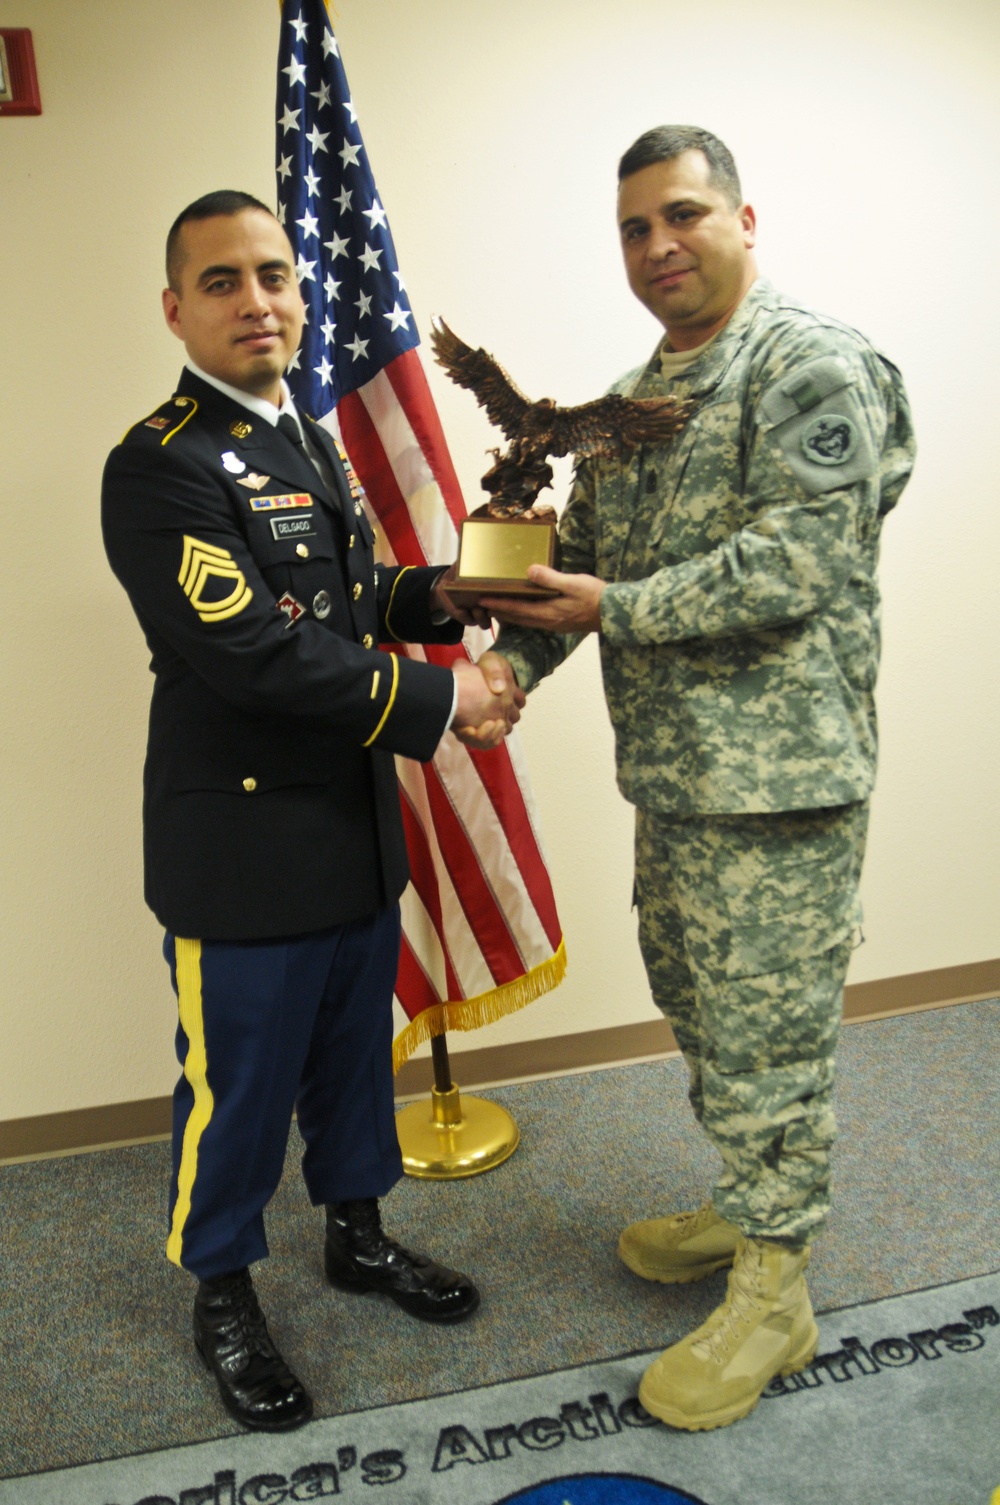 Standout Army career counselor takes USARAK top honors for 2nd straight year